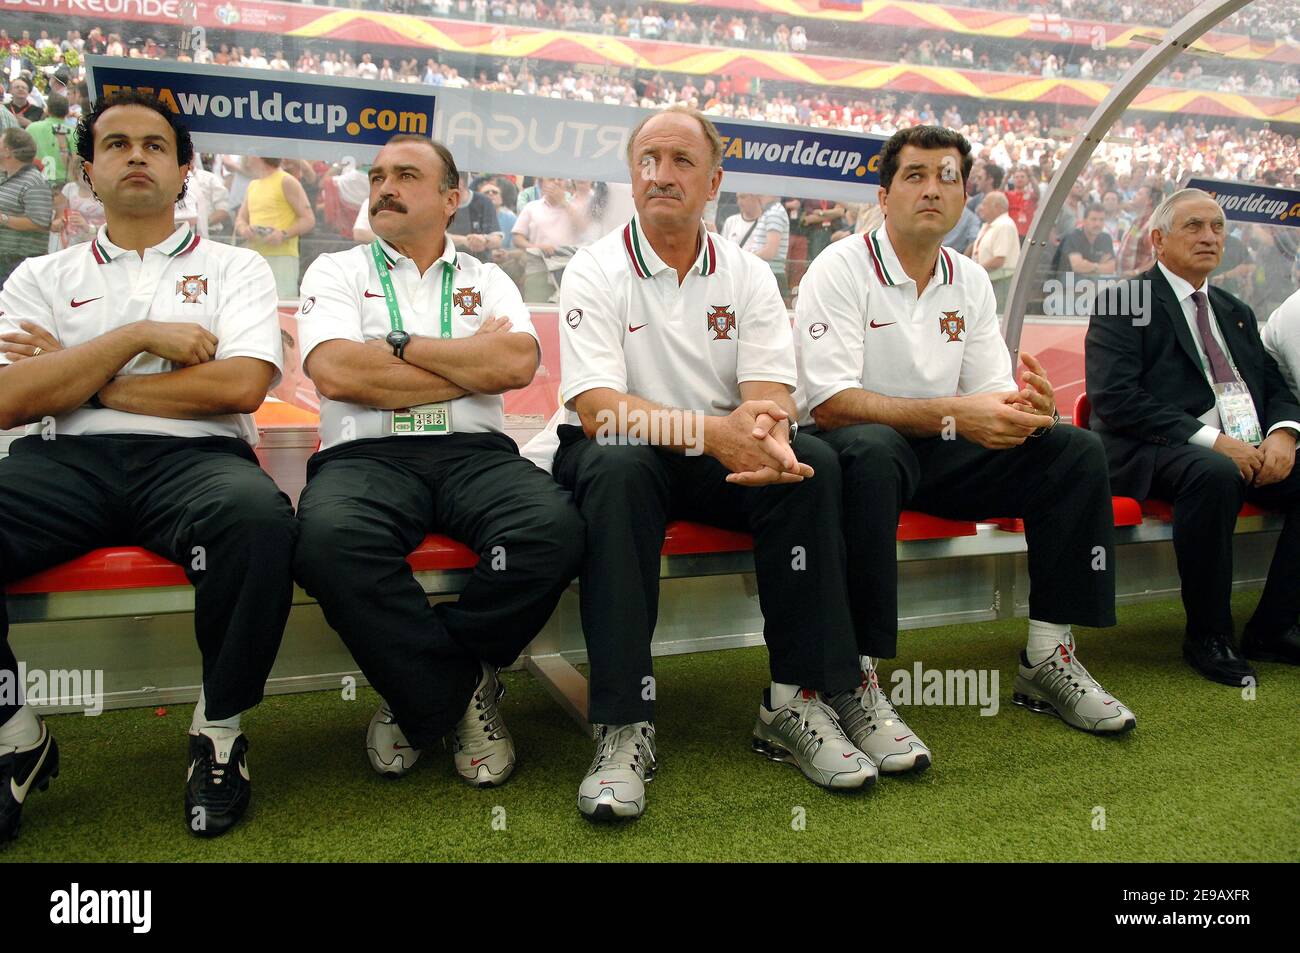 Portugal's coach Luiz Felipe Scolari (C) during the World Cup 2006, Portugal vs Iran at the Fifa World Cup Stadium in Frankfurt, Germany on June 17, 2006. Portugal won 2-0. Photo by Gouhier-Hahn-Orban/Cameleon/ABACAPRESS.COM Stock Photo